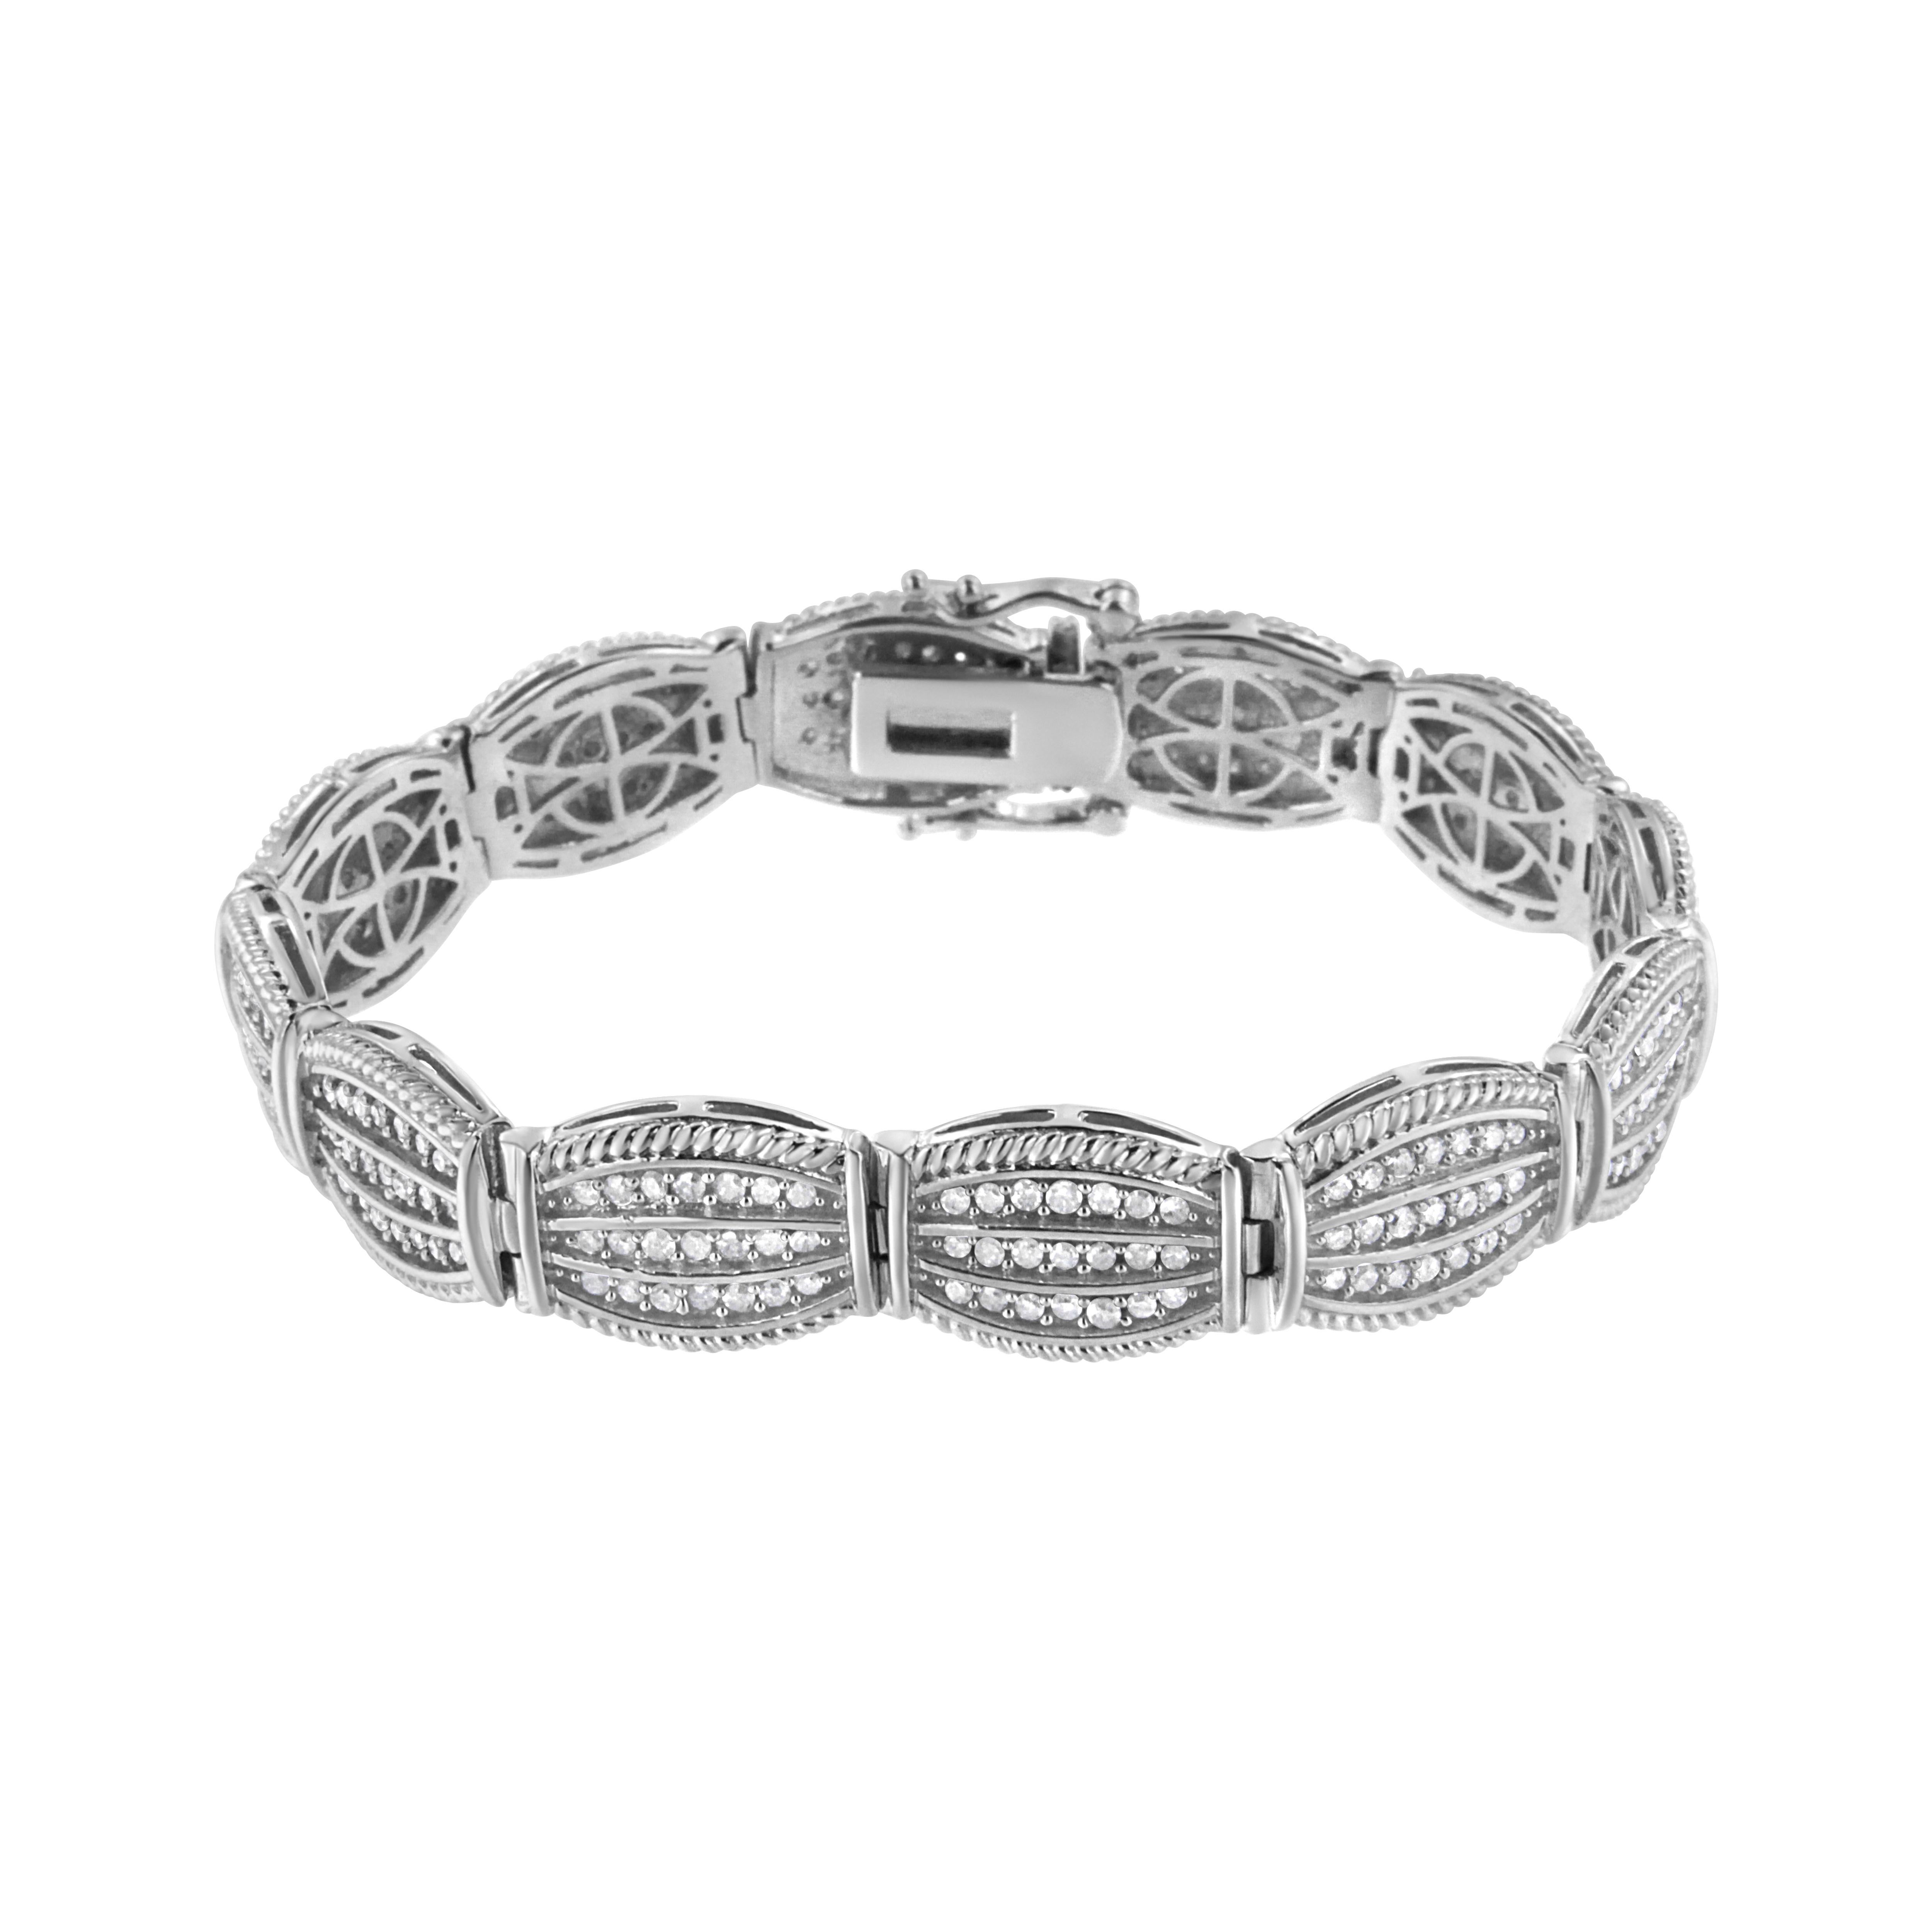 This bracelet is a breathtaking piece. 3ct TDW of round cut diamonds glimmer in this sterling silver art deco link bracelet. Each link has a geometric shape lined with three rows of diamonds. A silver rope ribbon lines the top and bottom of each